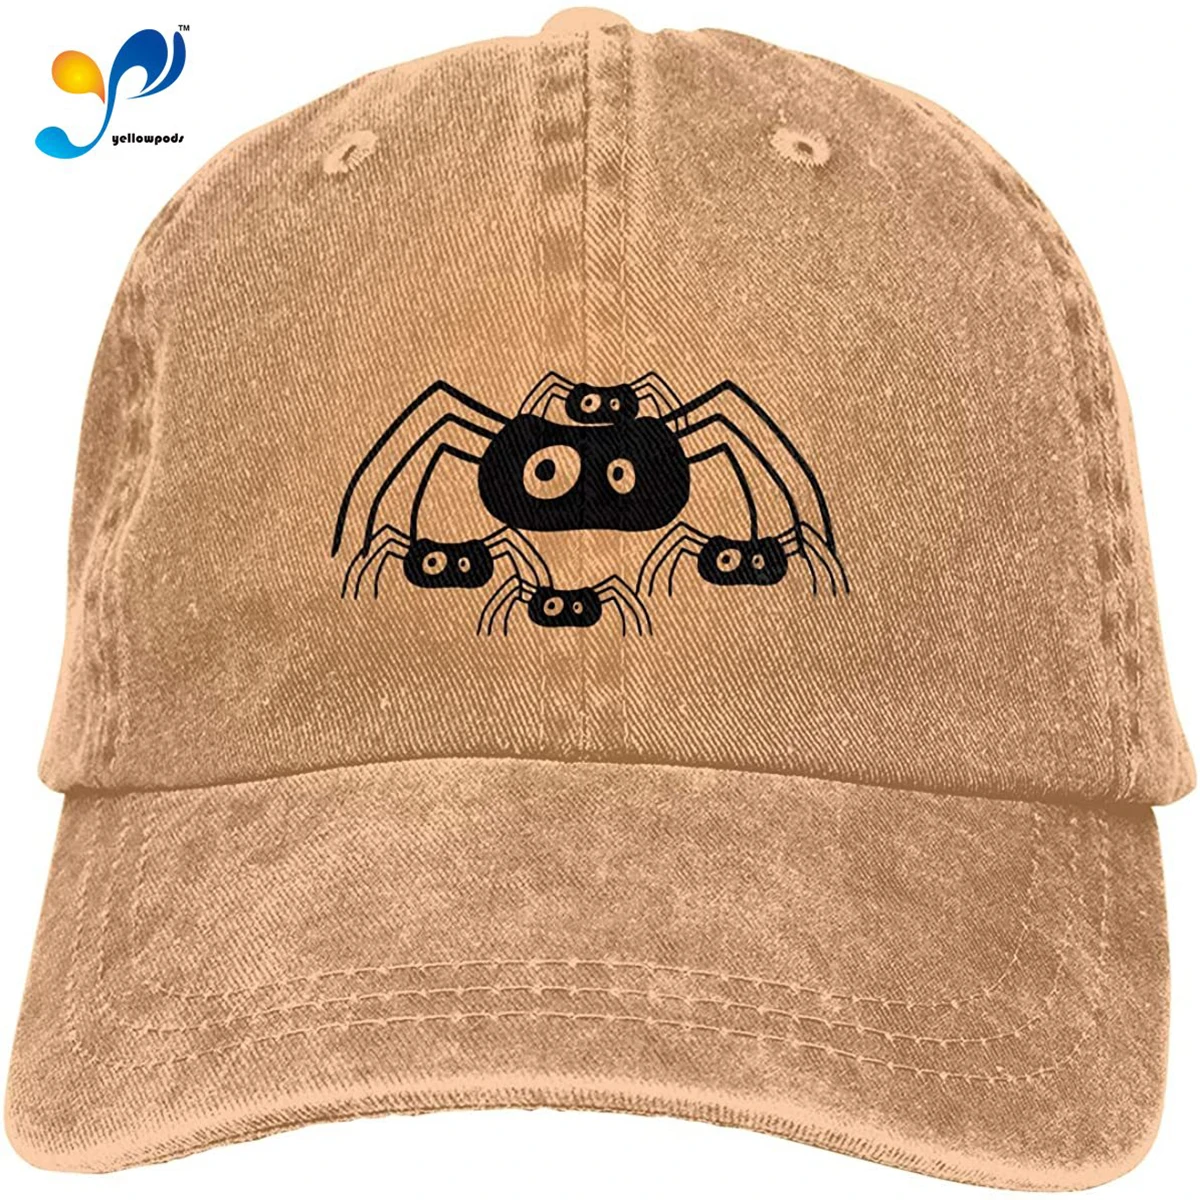 

Unisex Spider Many Children Vintage Washed Twill Baseball Caps Adjustable Hat Funny Humor Irony Graphics of Adult Gift Natural